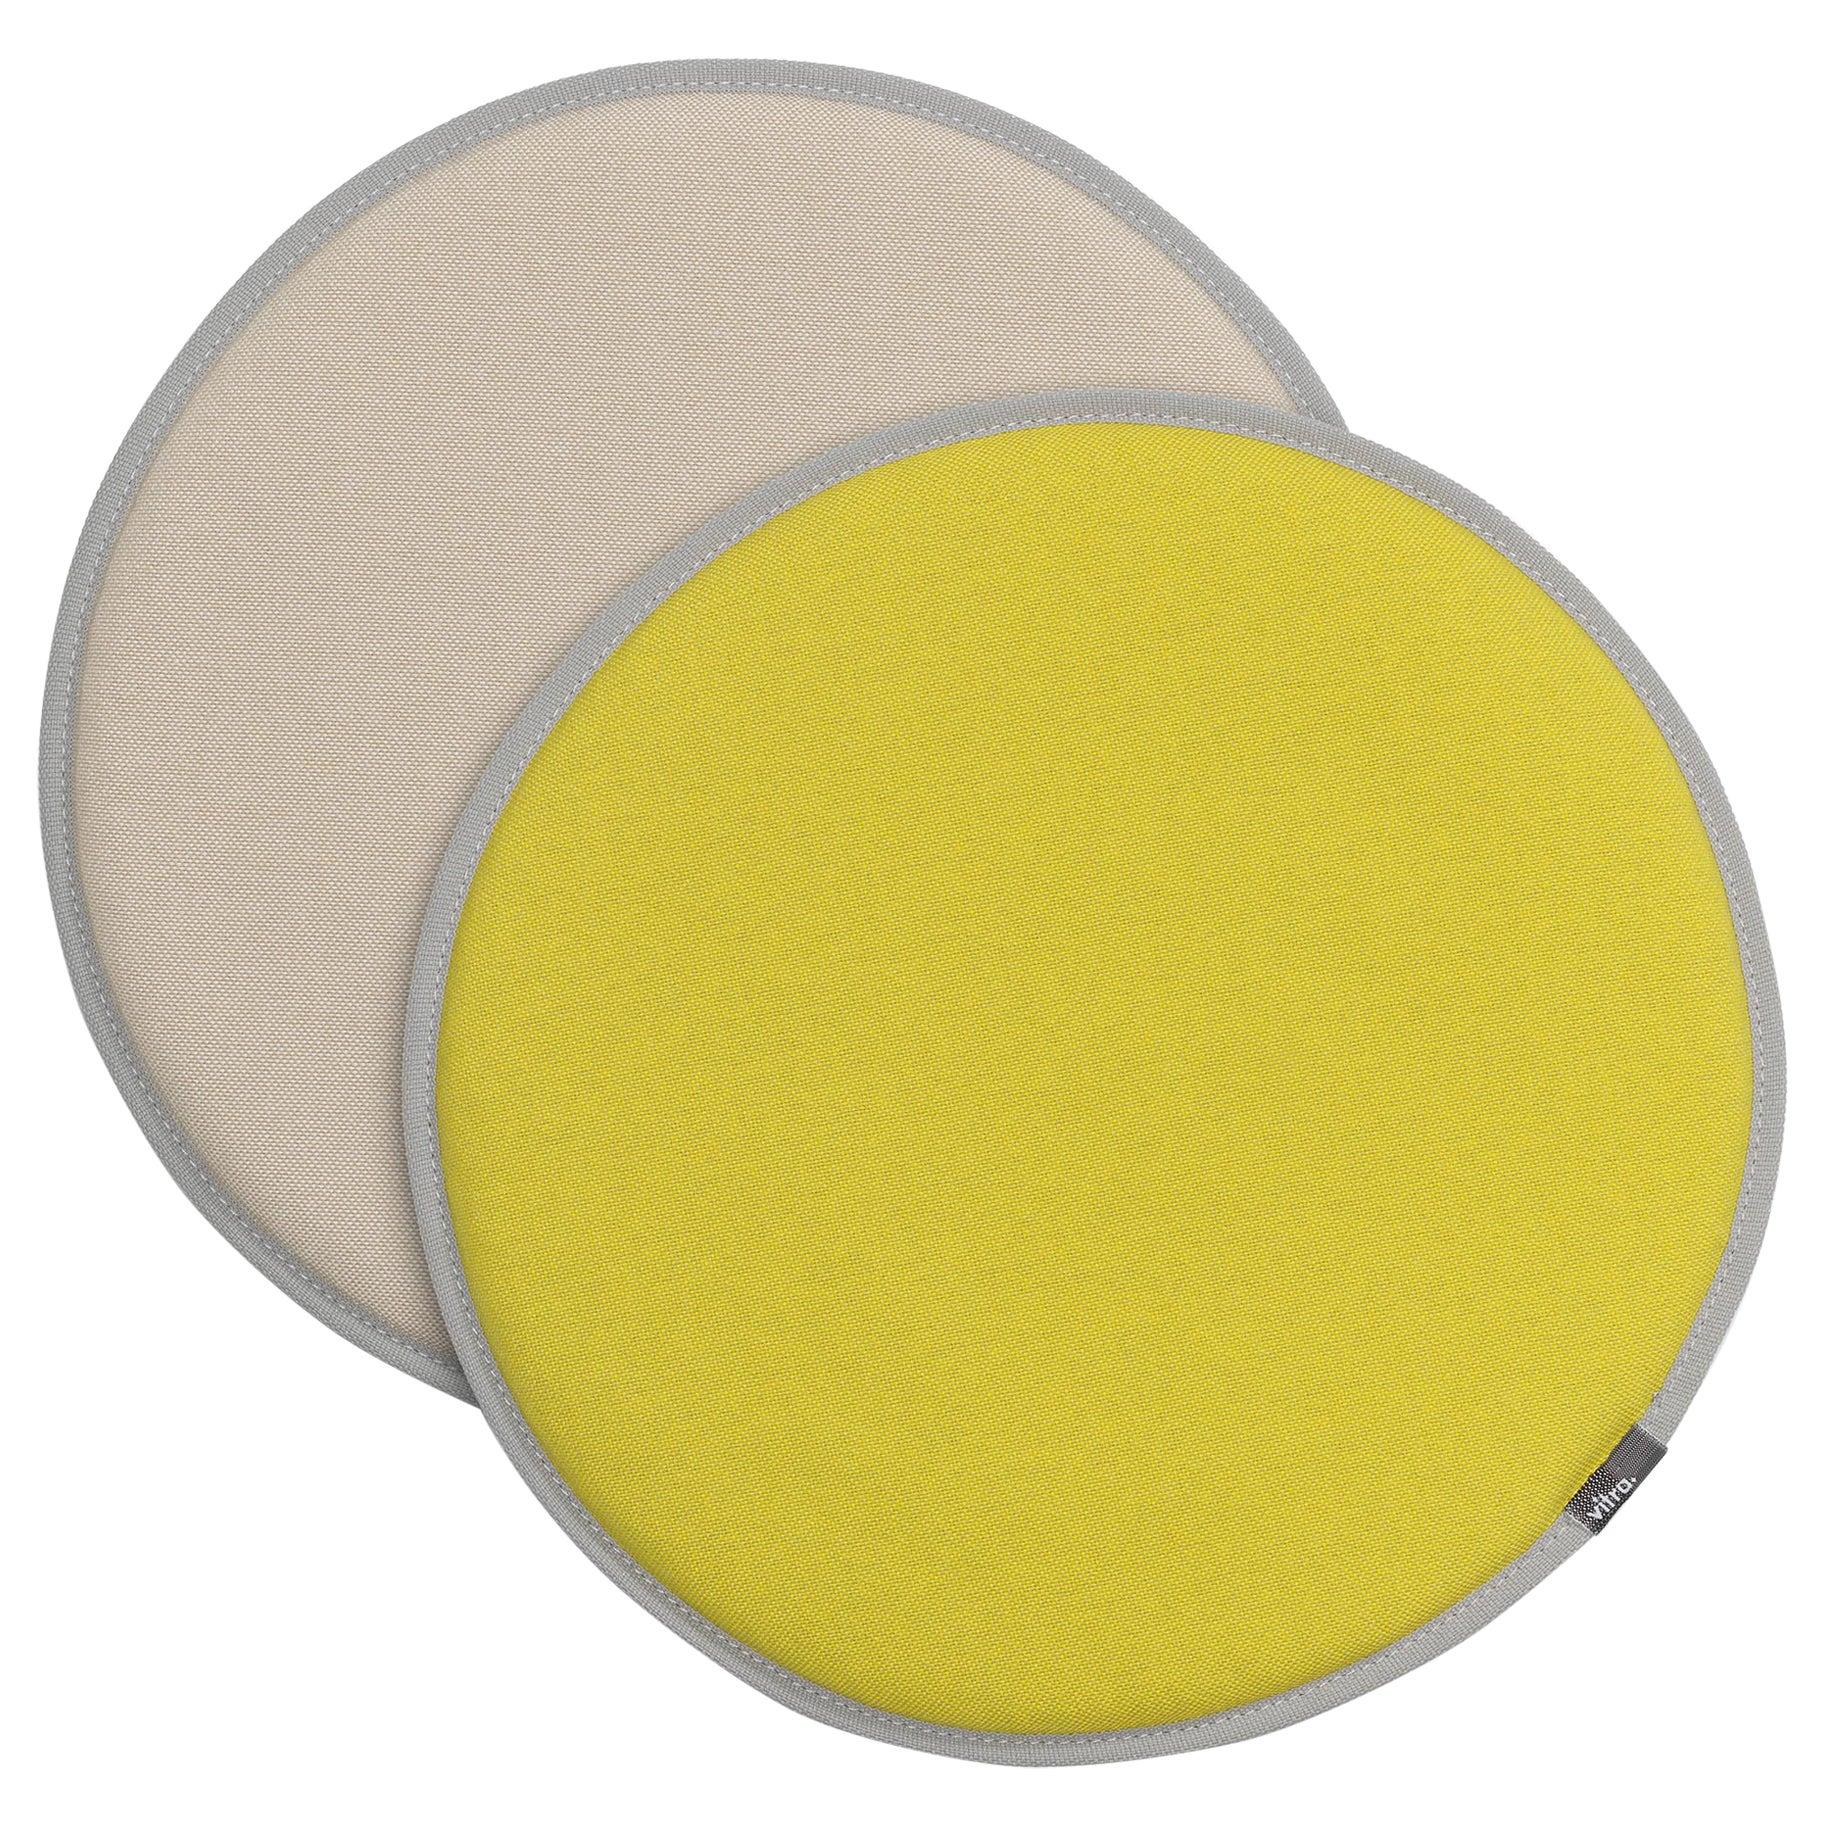 Vitra Seat Dot Cushion in Yellow, Green, Parchment & Cream by Hella Jongerius For Sale